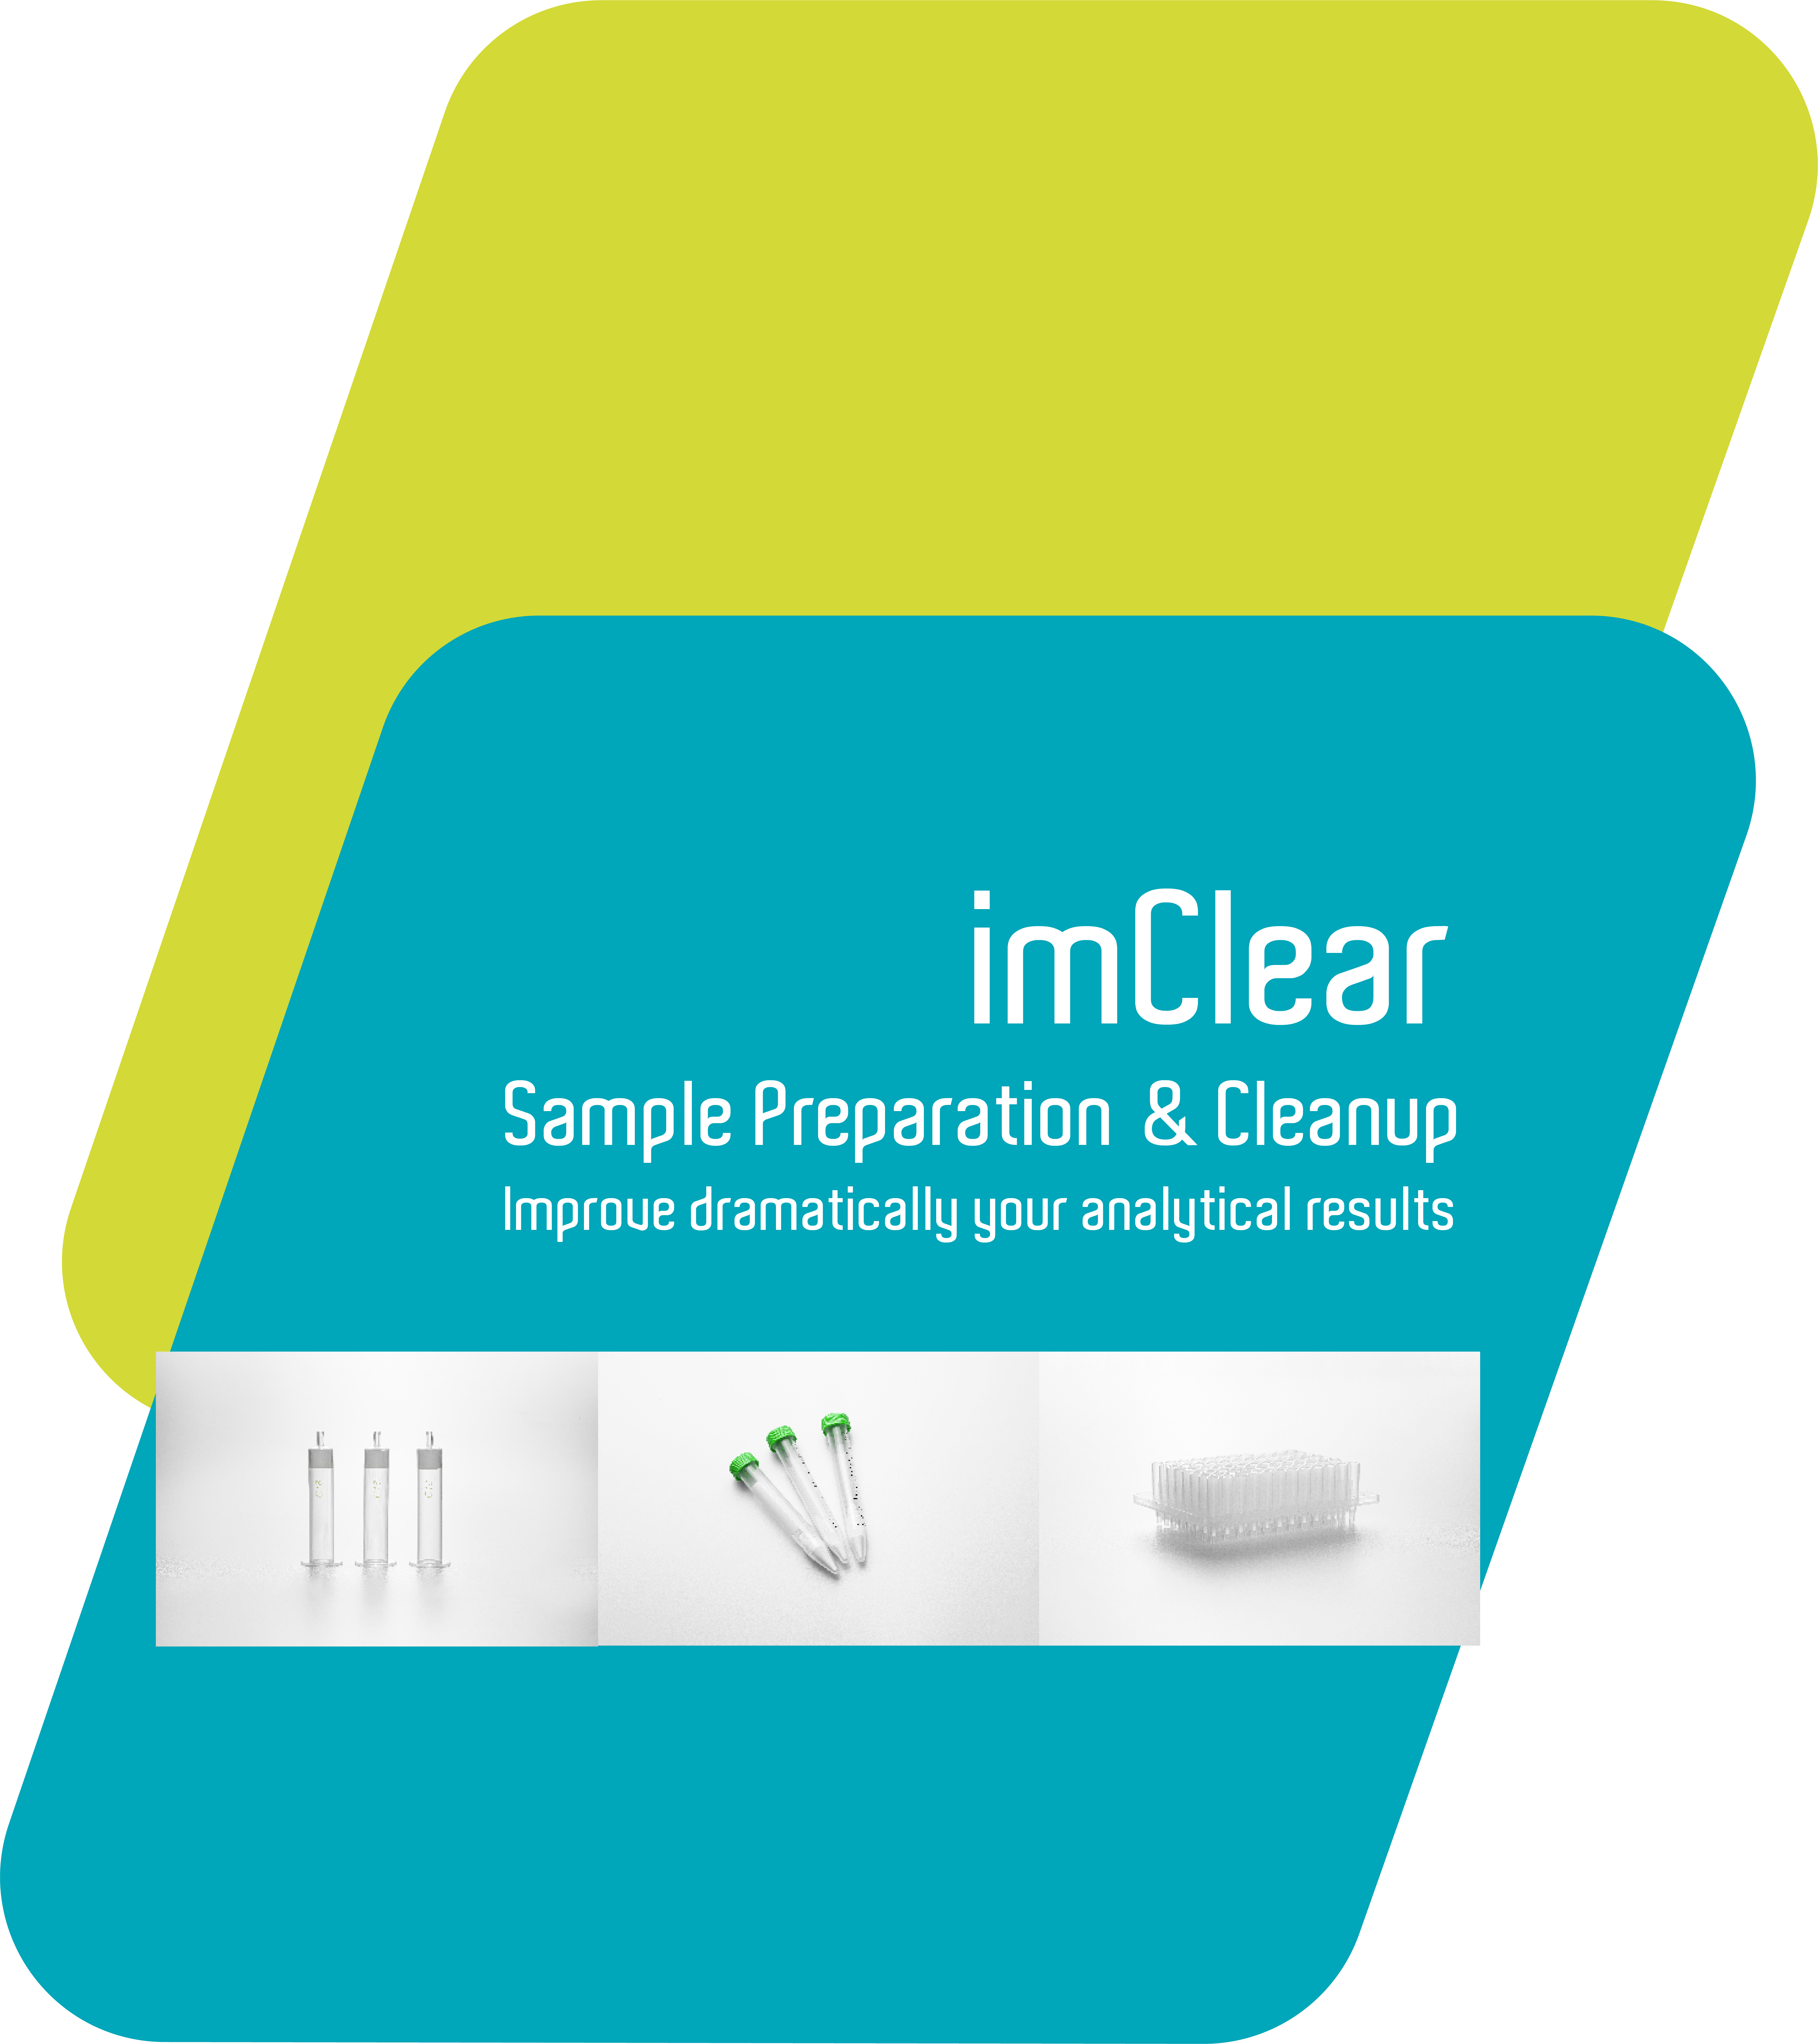 imClear Sample pre & cleanup, improve your analytical results